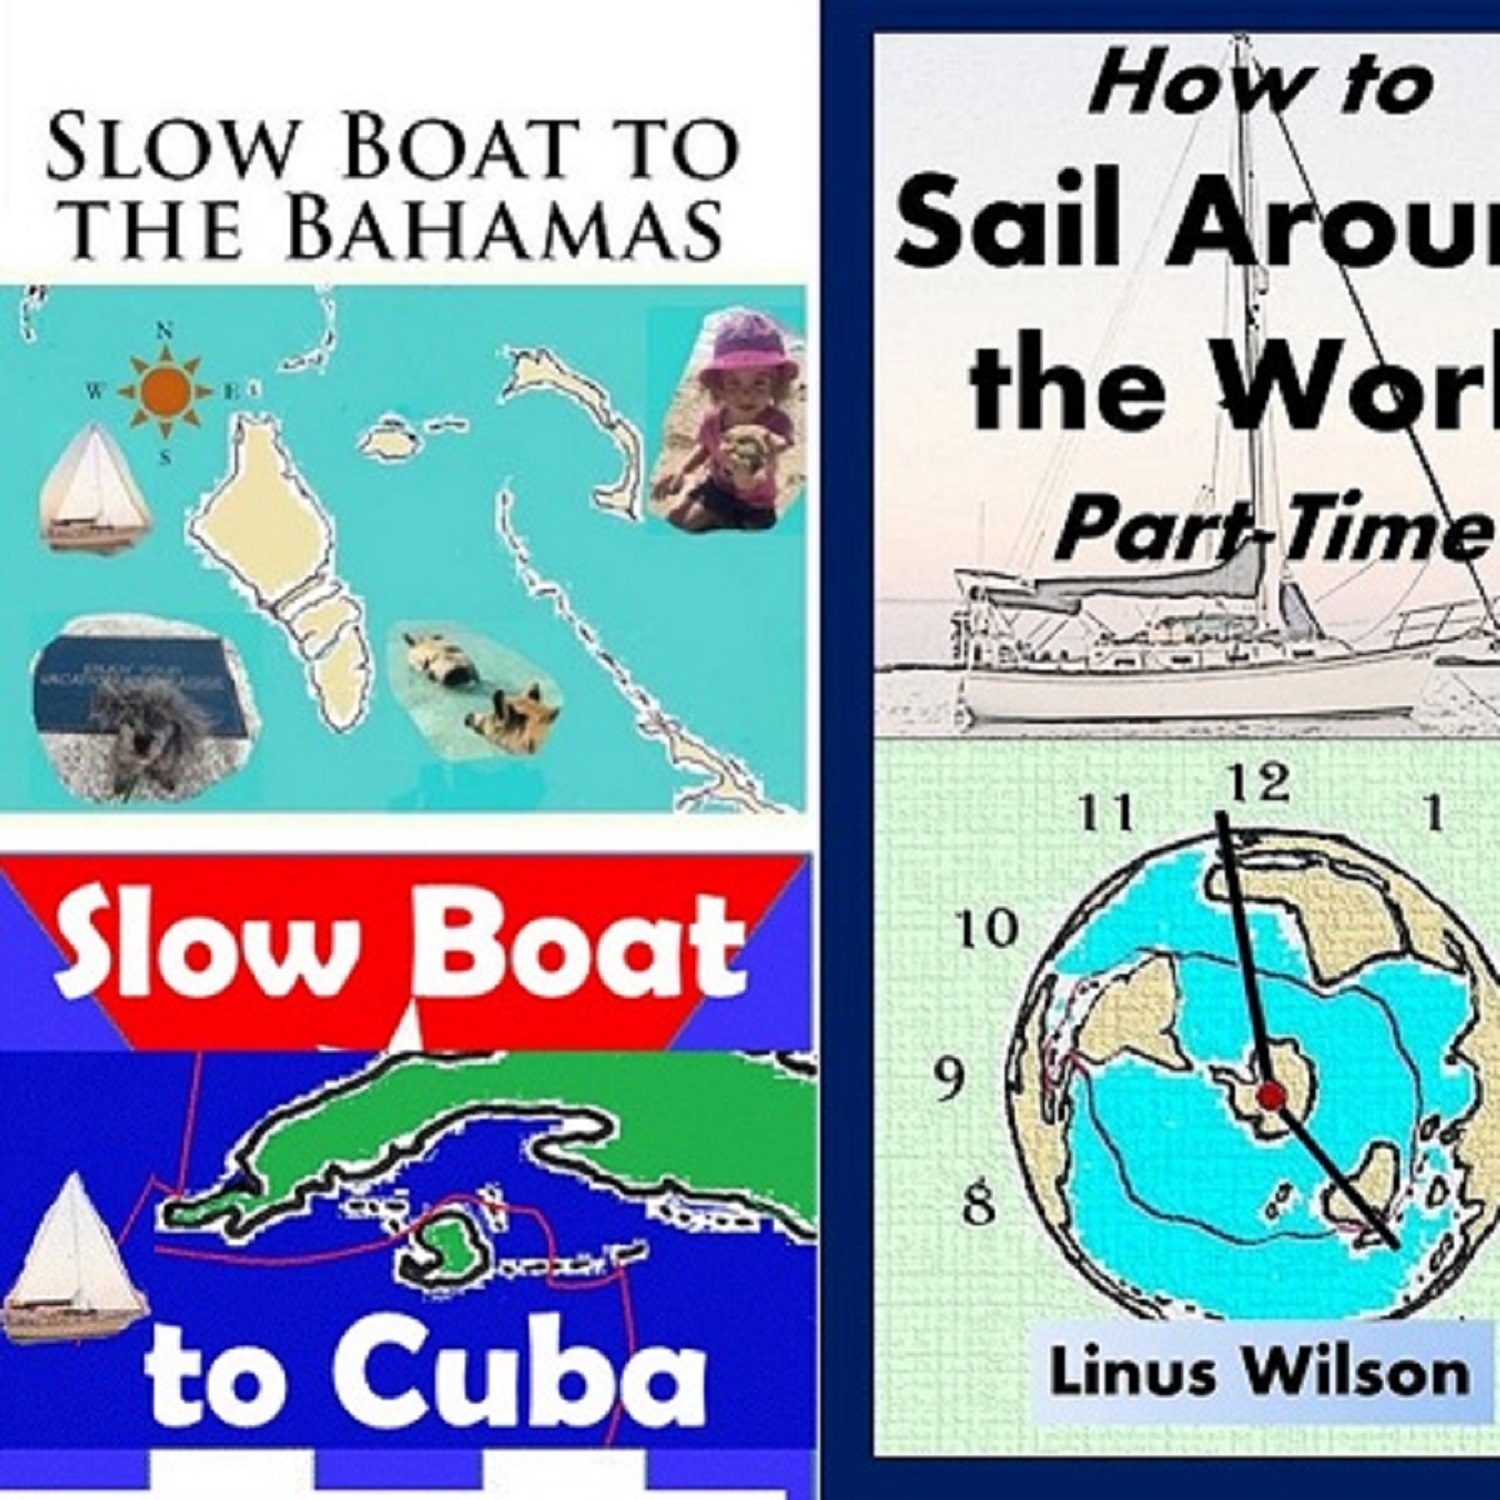 Ep. 38: Houston Boat Show Talk of How to Sail Around the World Part-Time by Linus Wilson